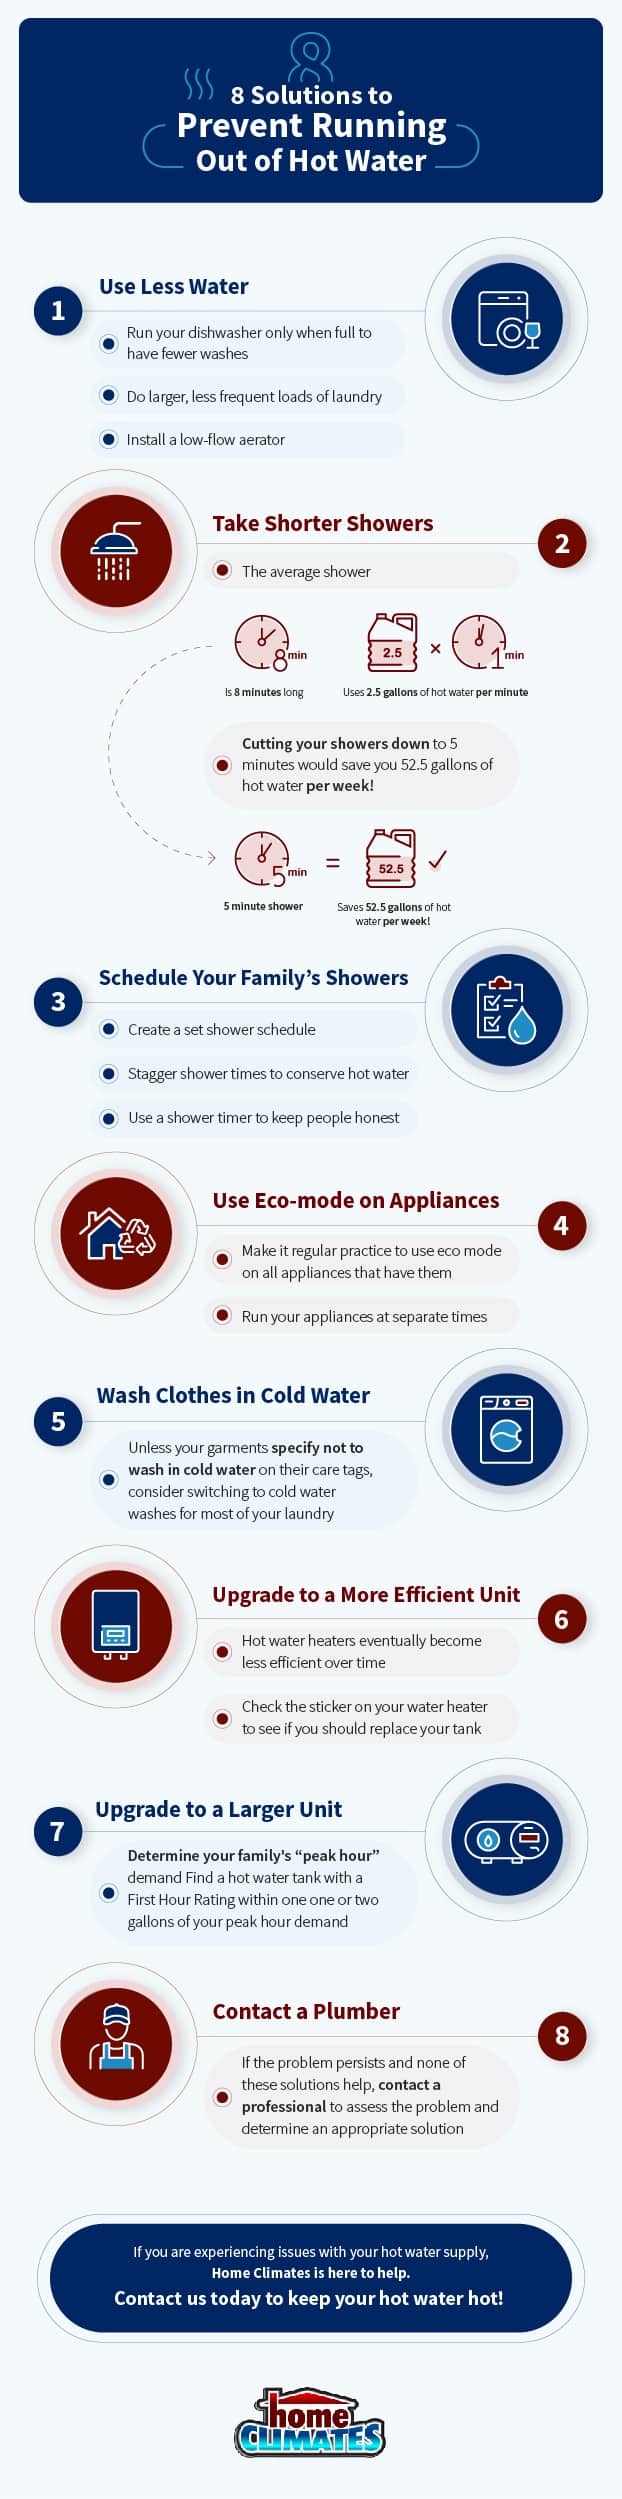 graphic giving 8 tips on how to prevent running out of hot water